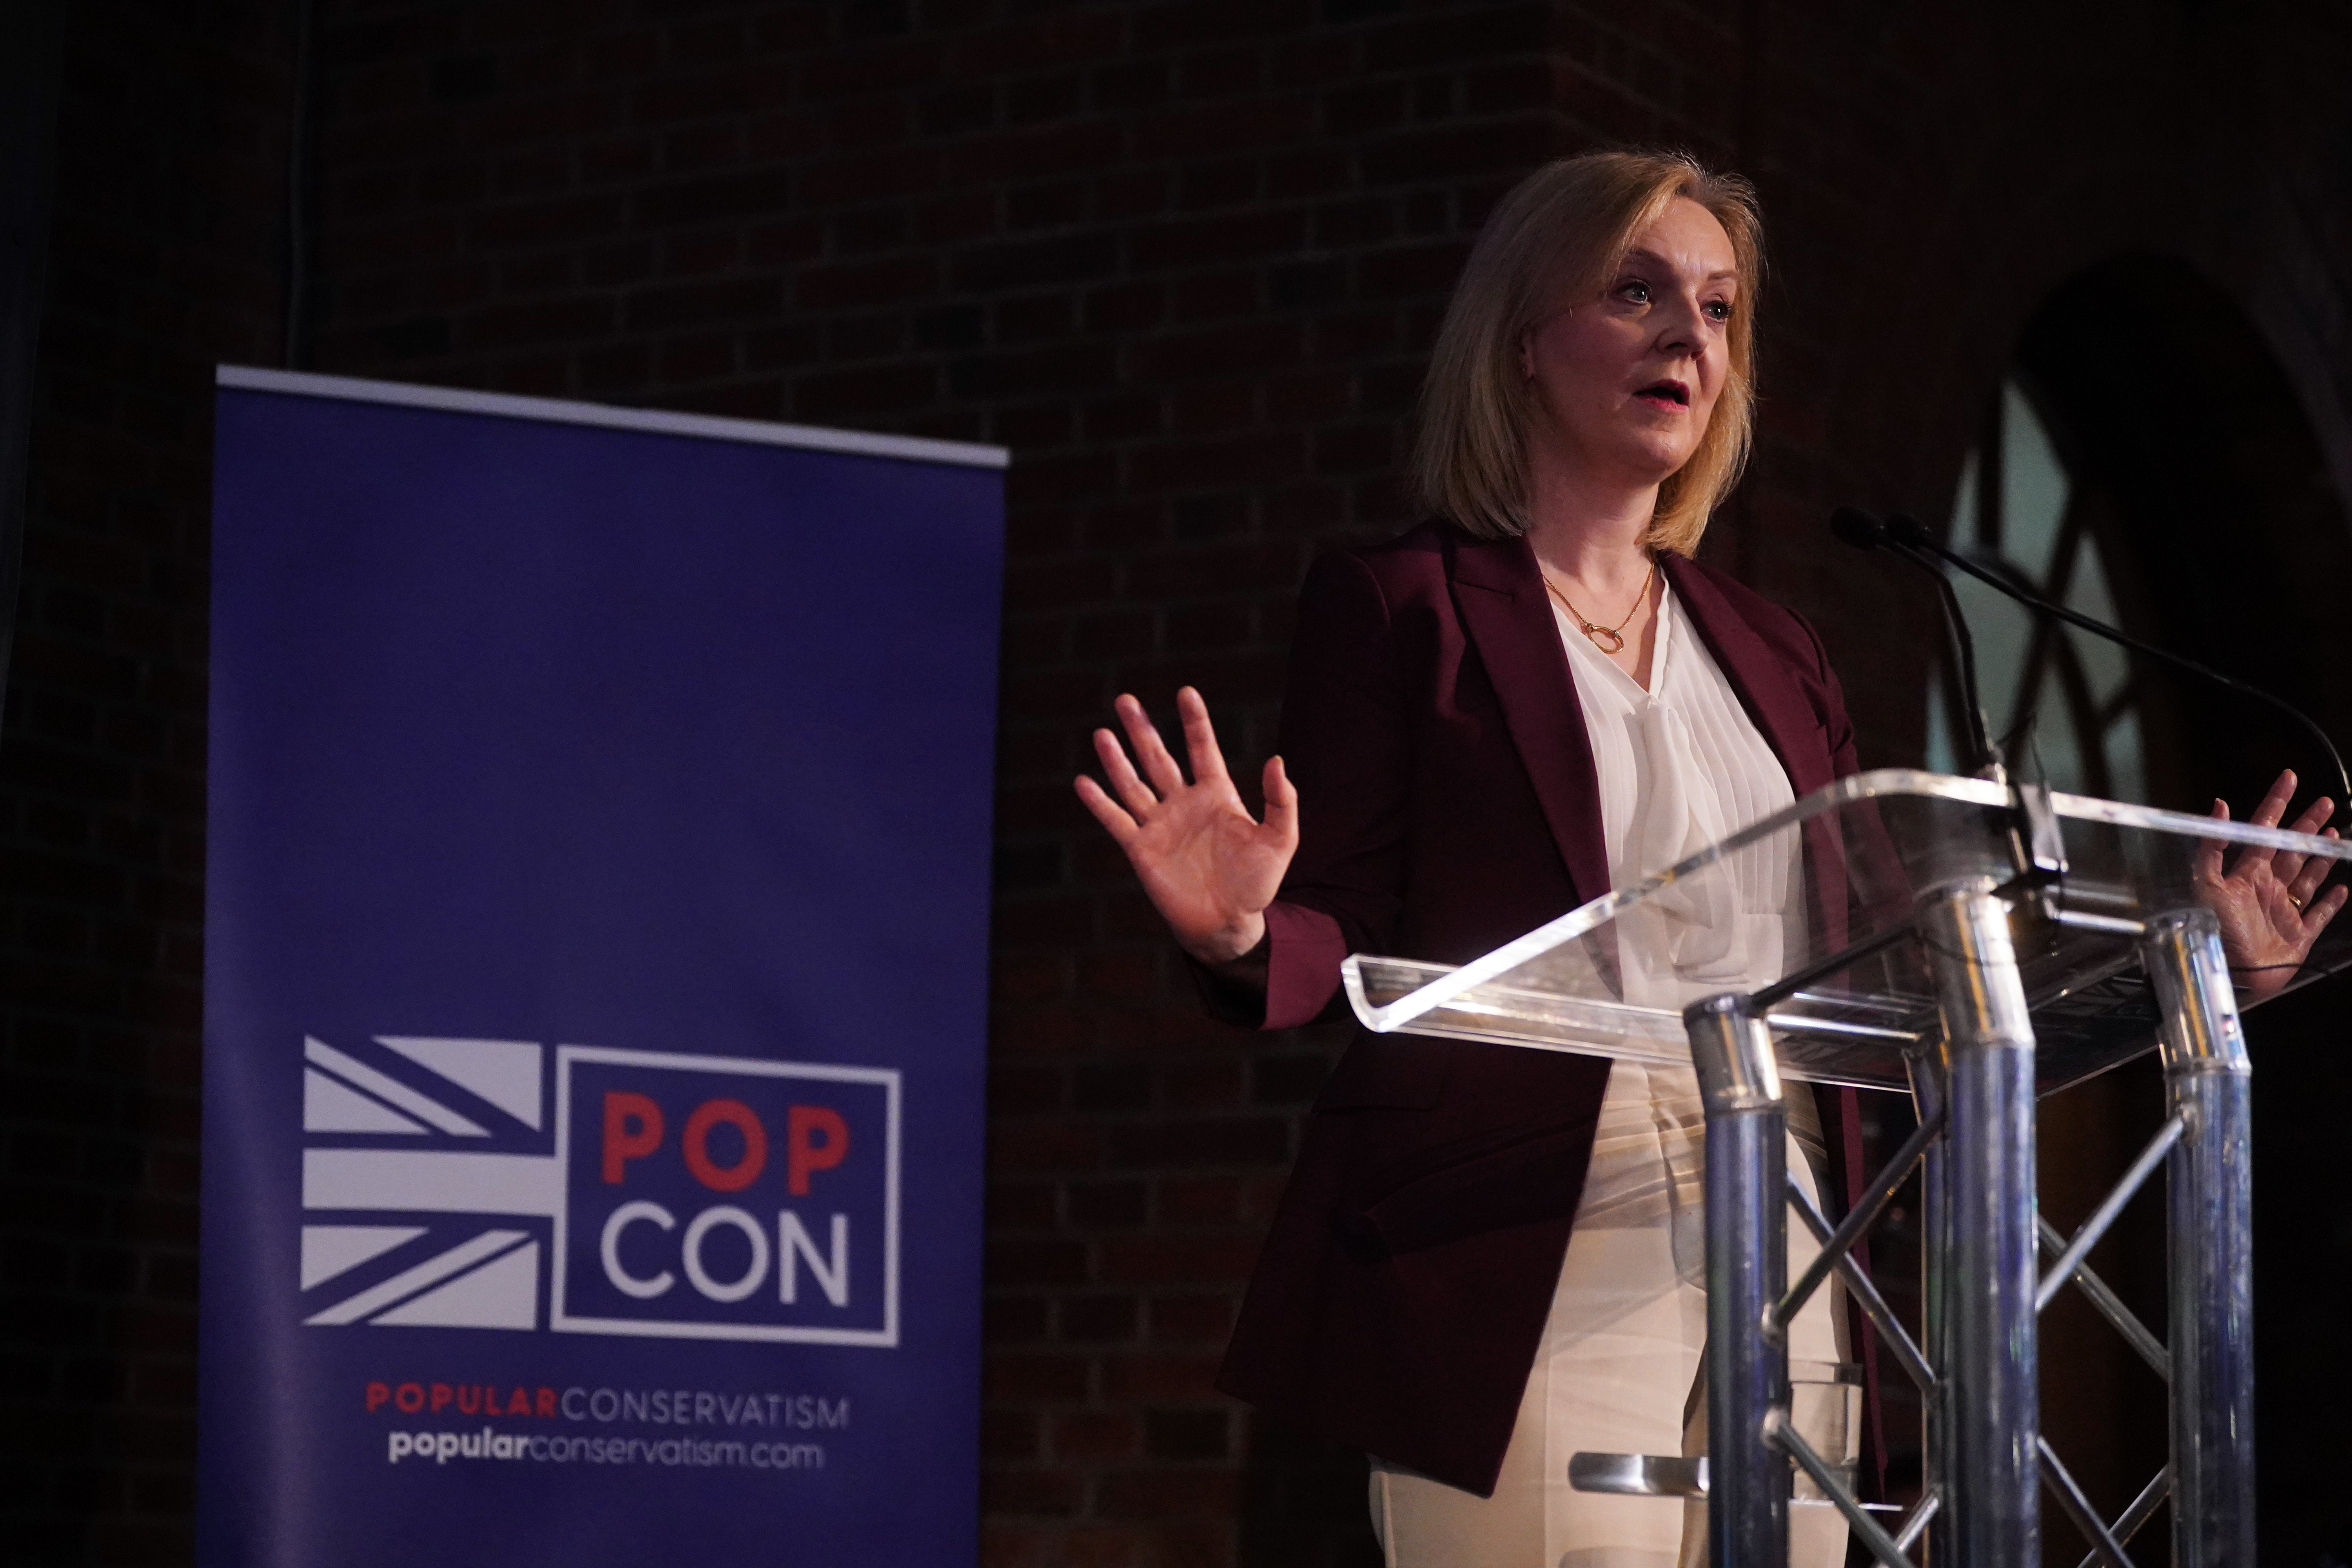 Ten years on from ‘pork markets’, former prime minster Liz Truss seems to have grown no more self-aware, launching ‘PopCon’